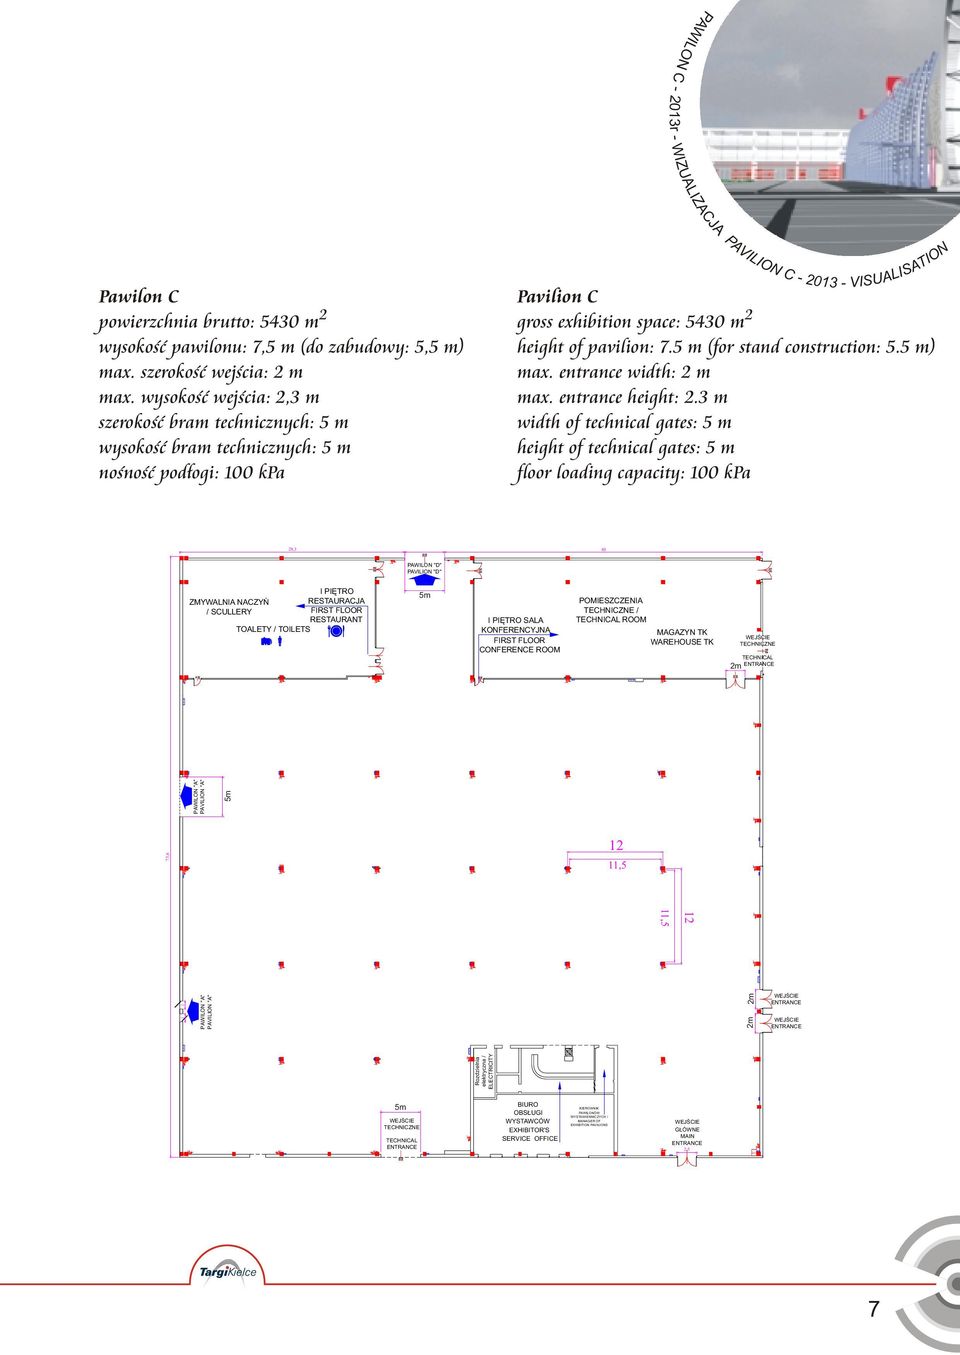 pavilion: 7.5 m (for stand construction: 5.5 m) max. entrance width: m max. entrance height:.